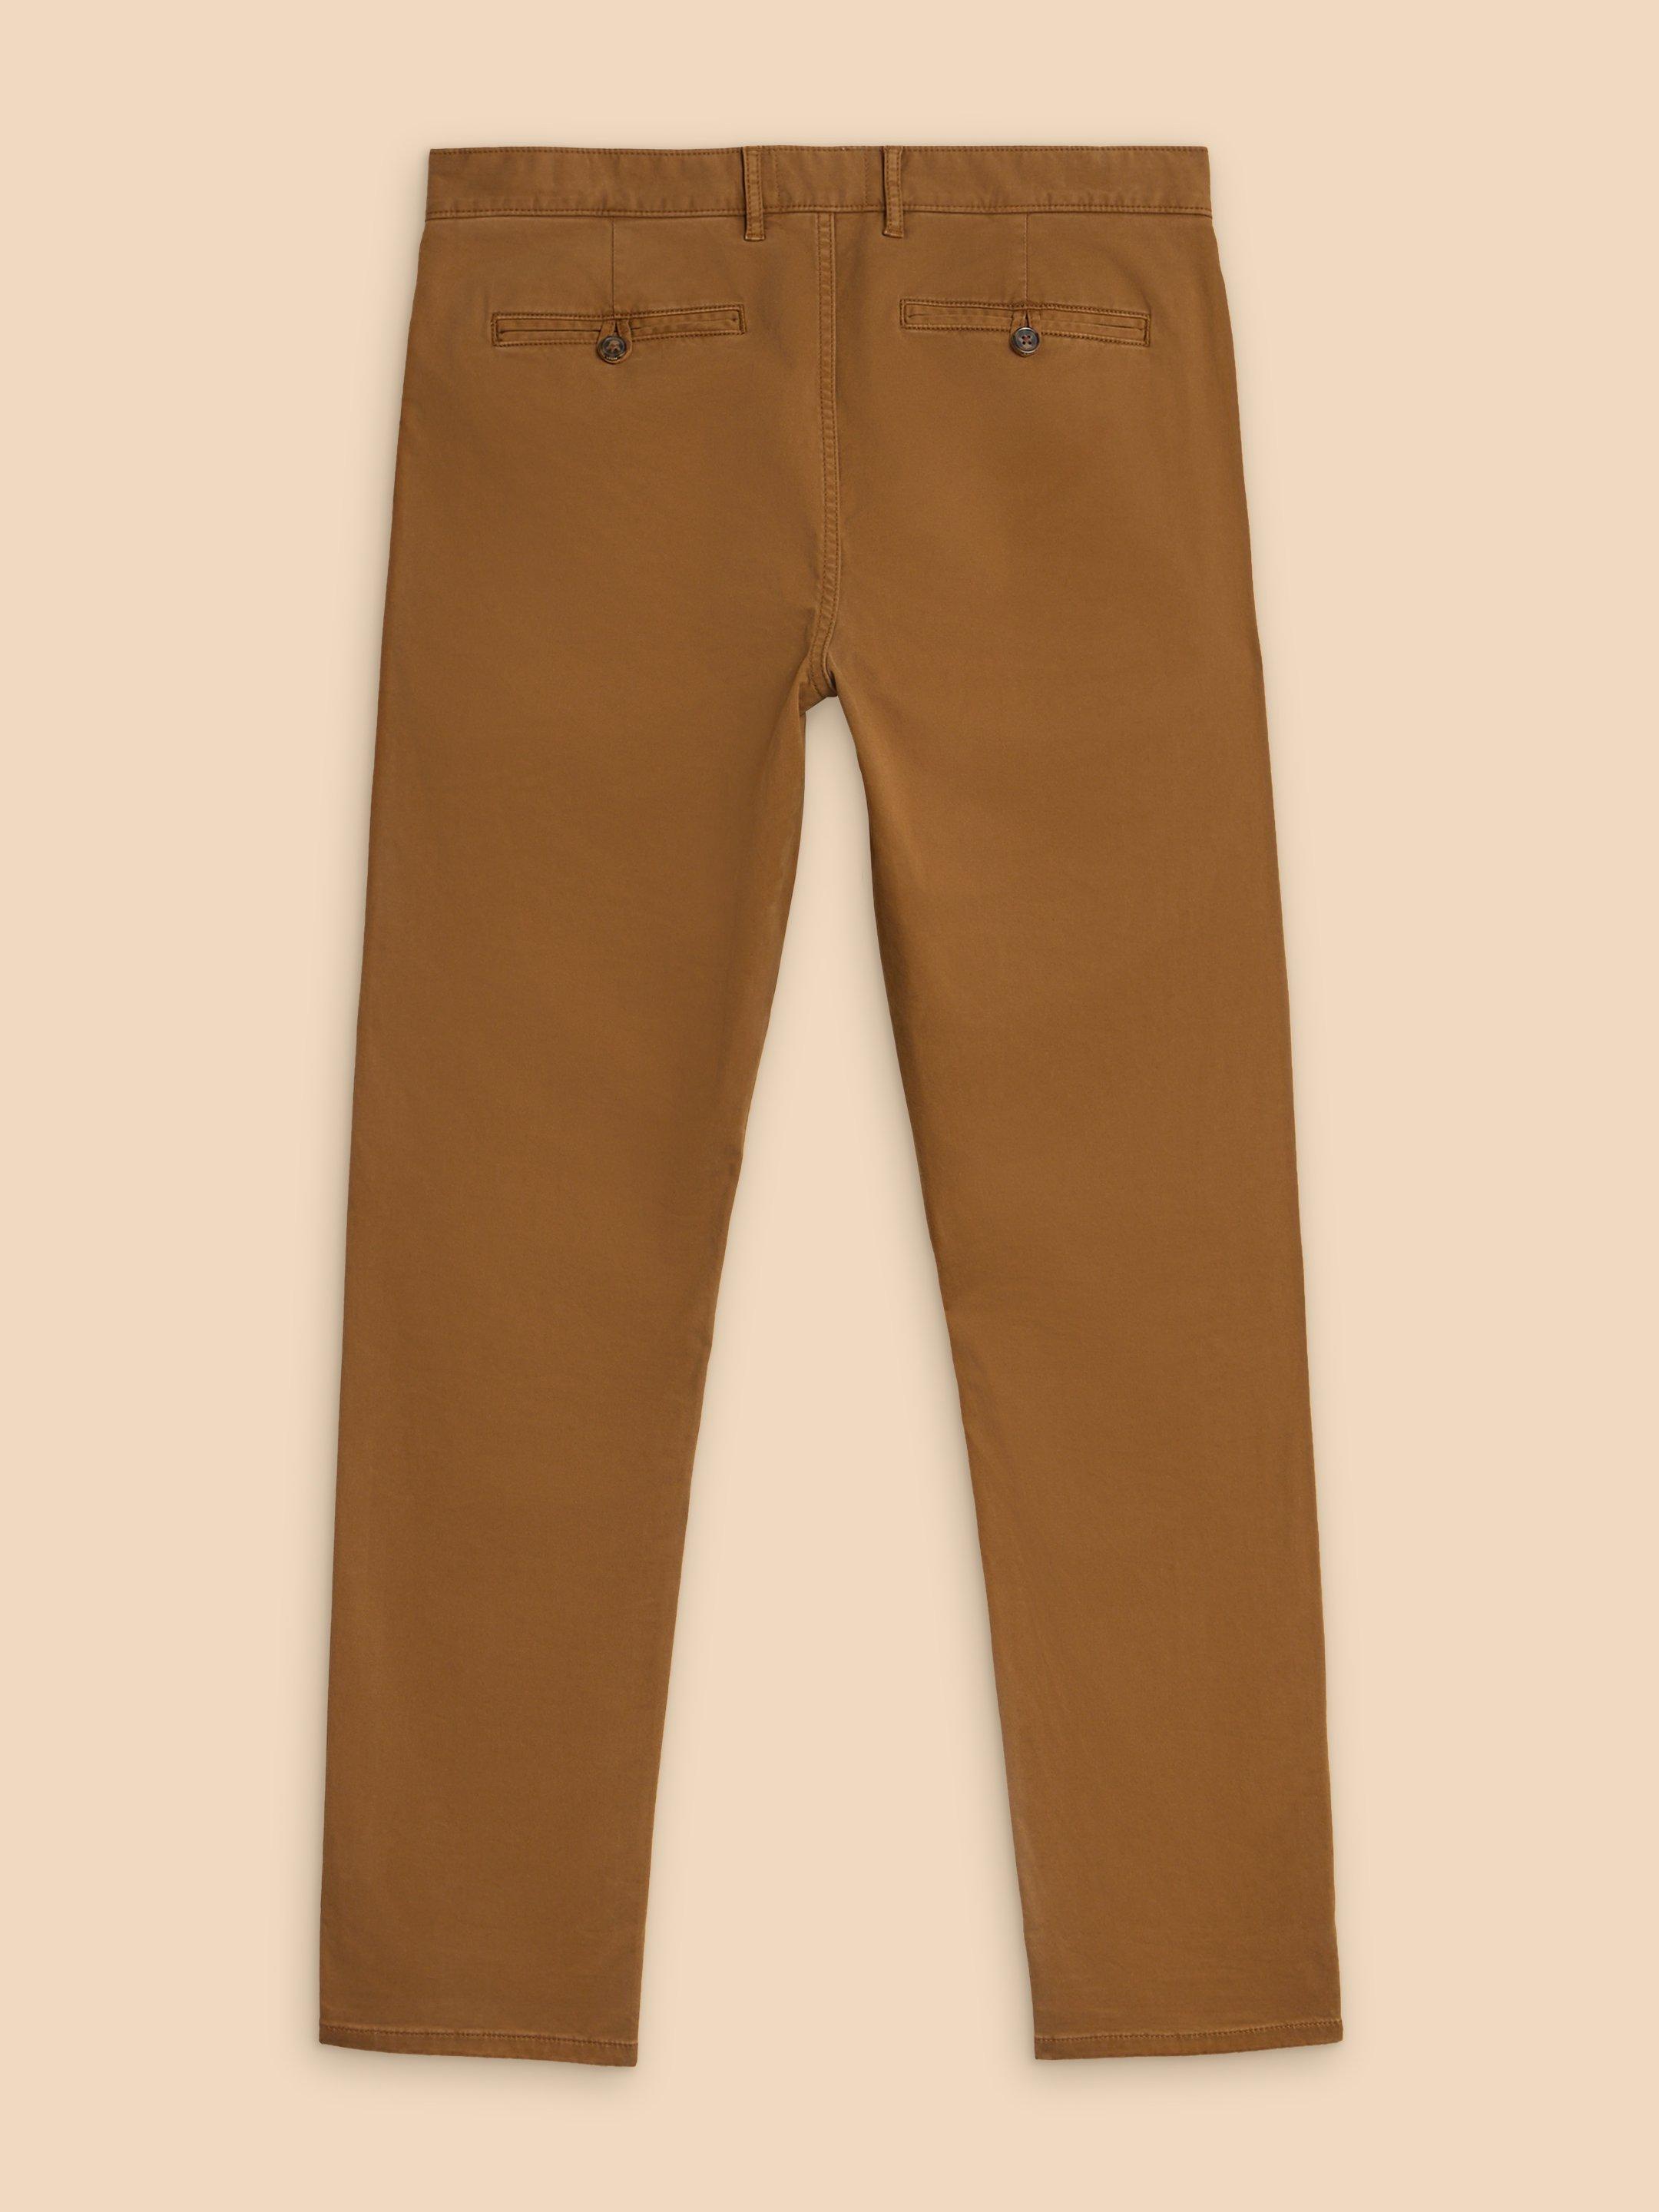 Sutton Organic Chino Trouser in MID BROWN - FLAT BACK